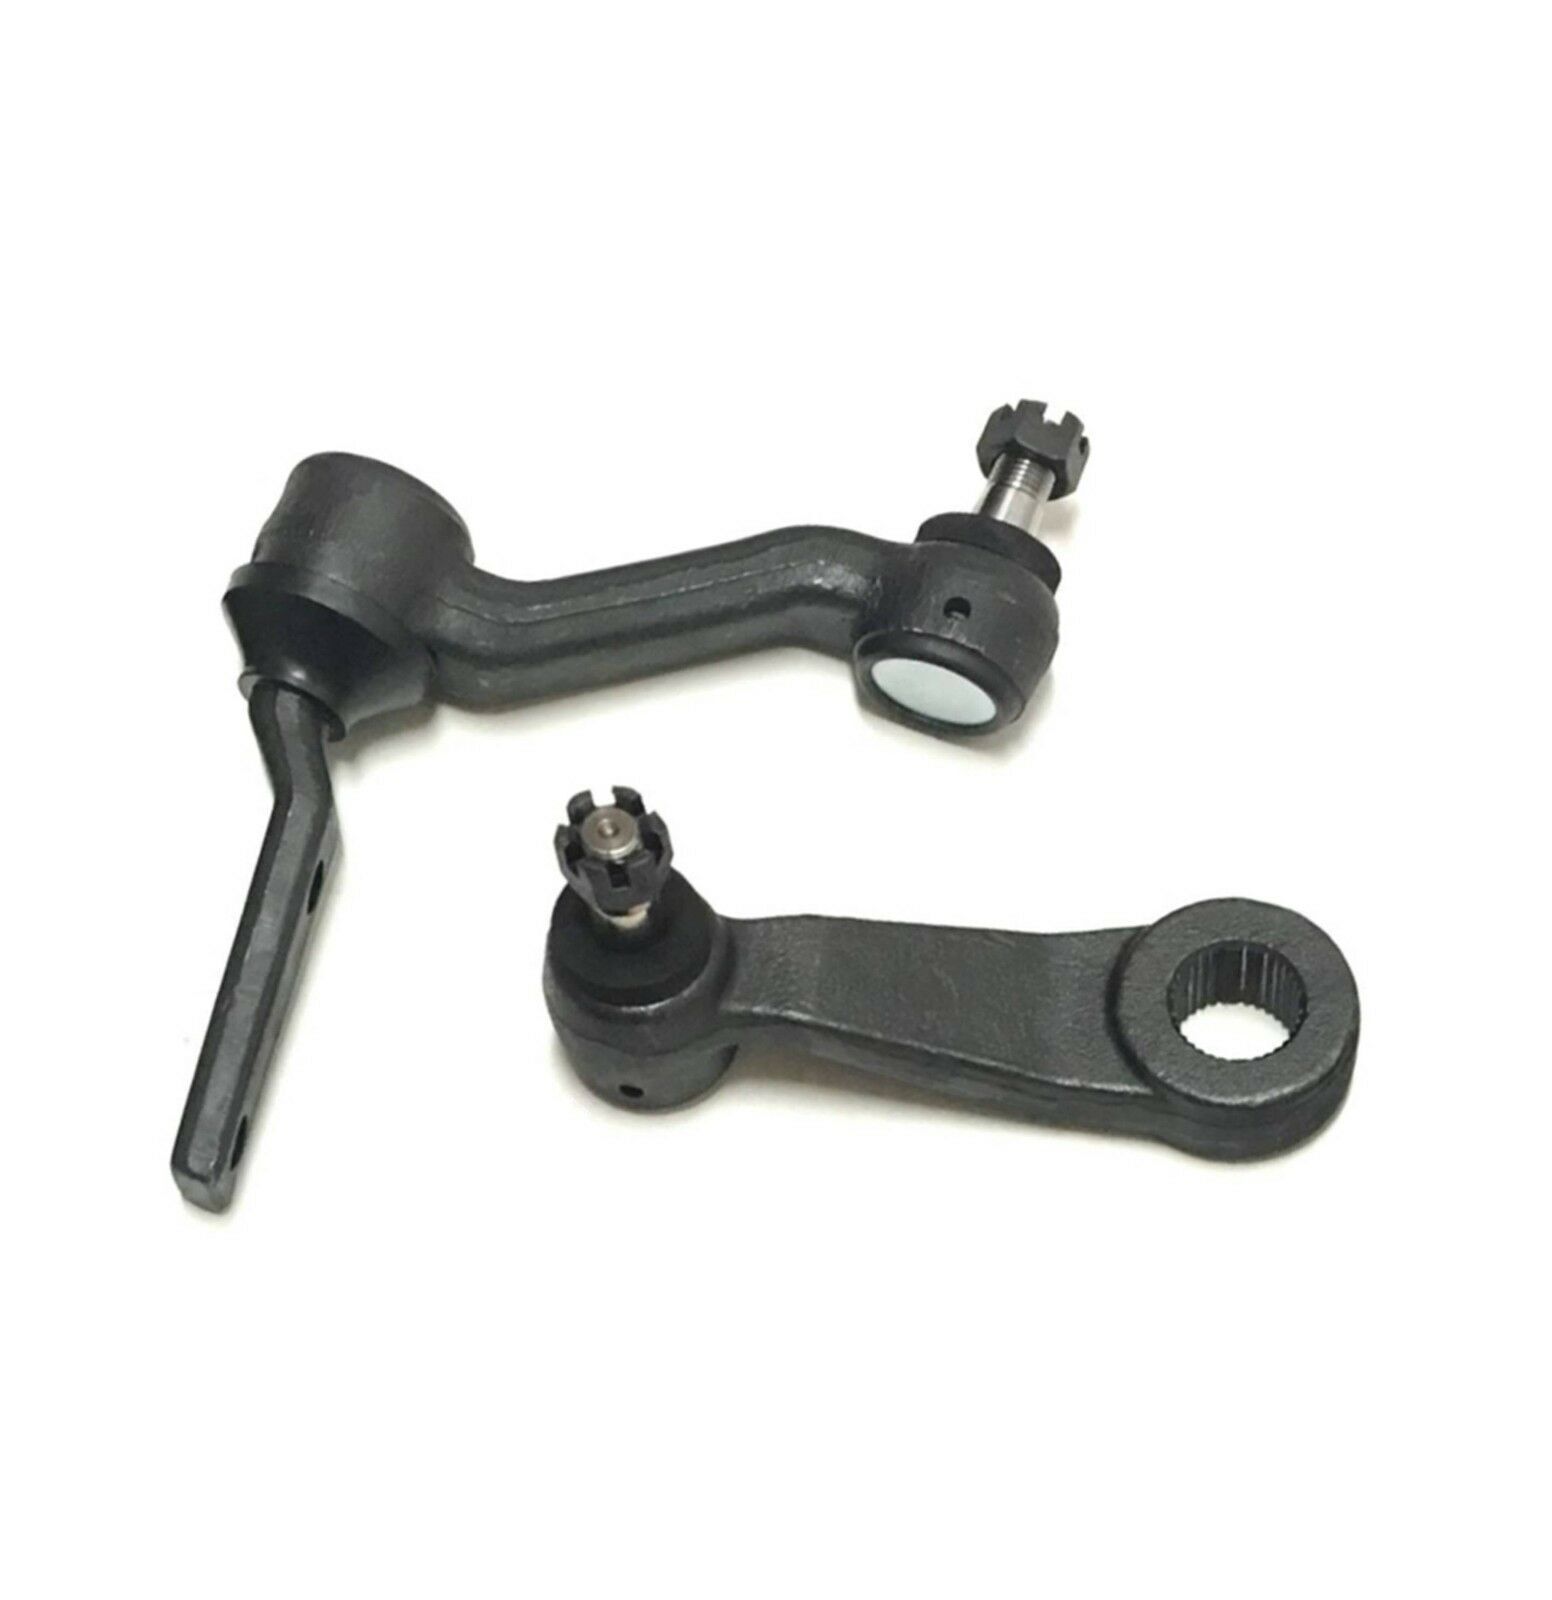 New Steering Idler and Pitman Arm Set for Blazer S10 Jimmy Sonoma Syclone Hombre